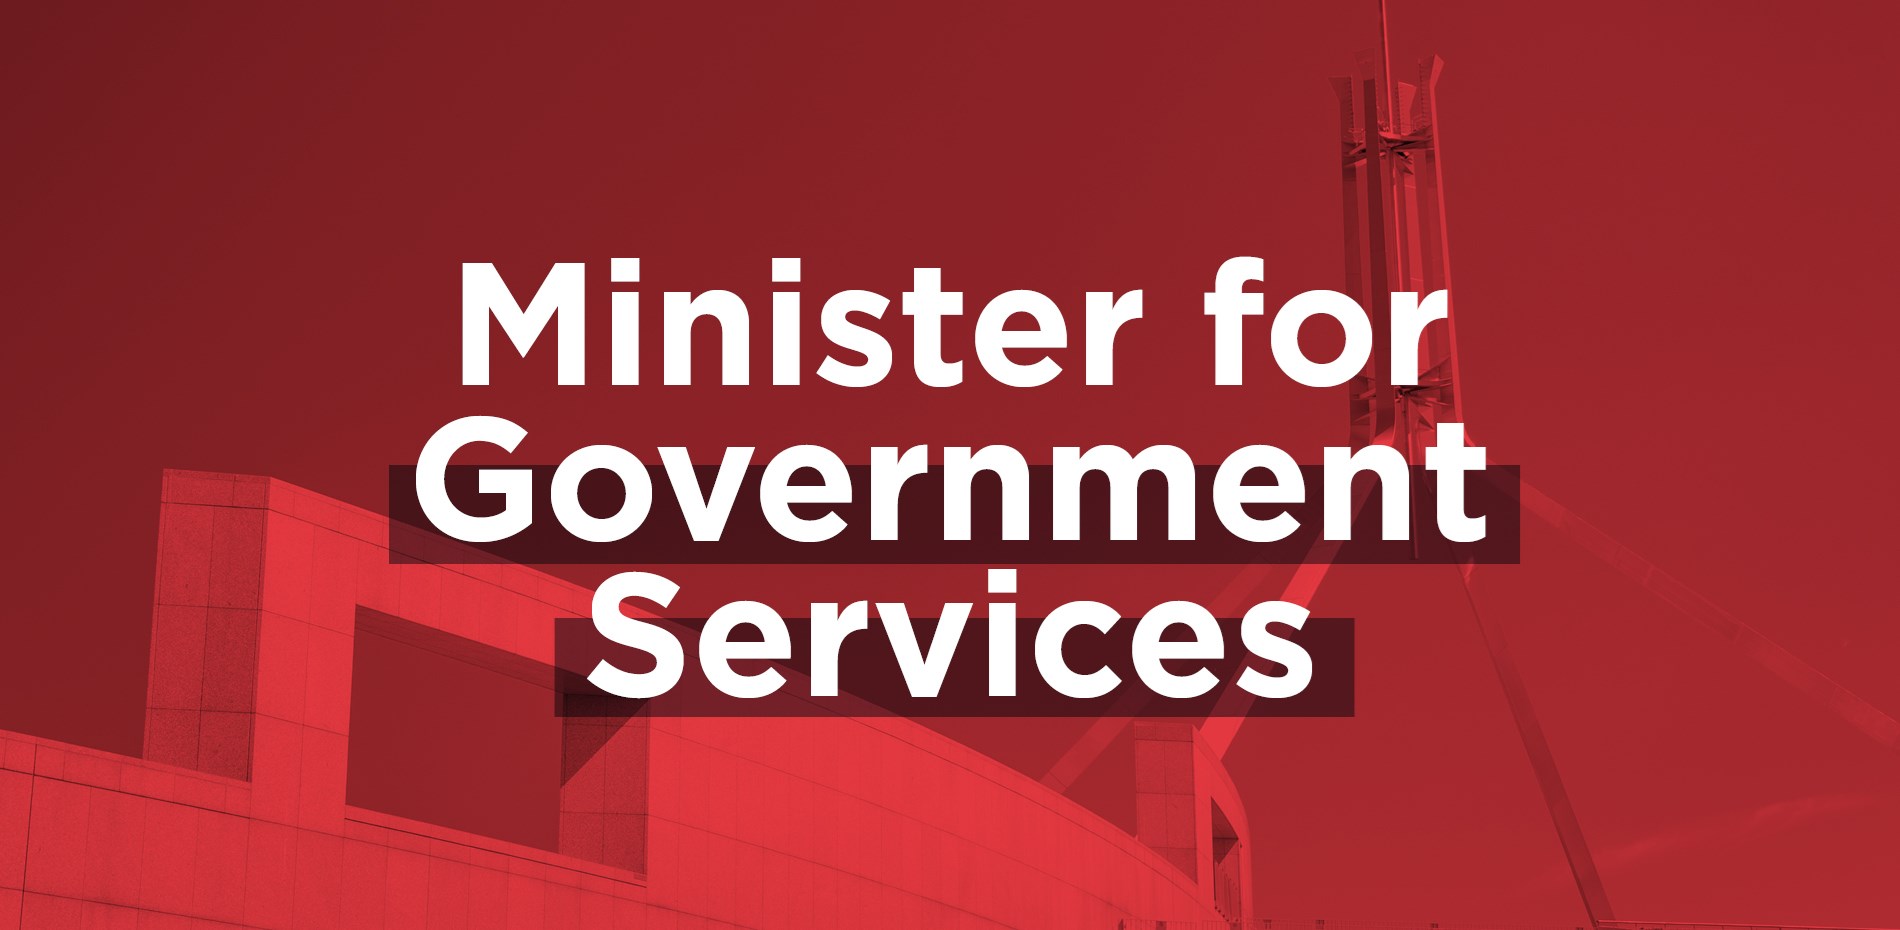 BOOSTING GOVERNMENT SERVICES Main Image